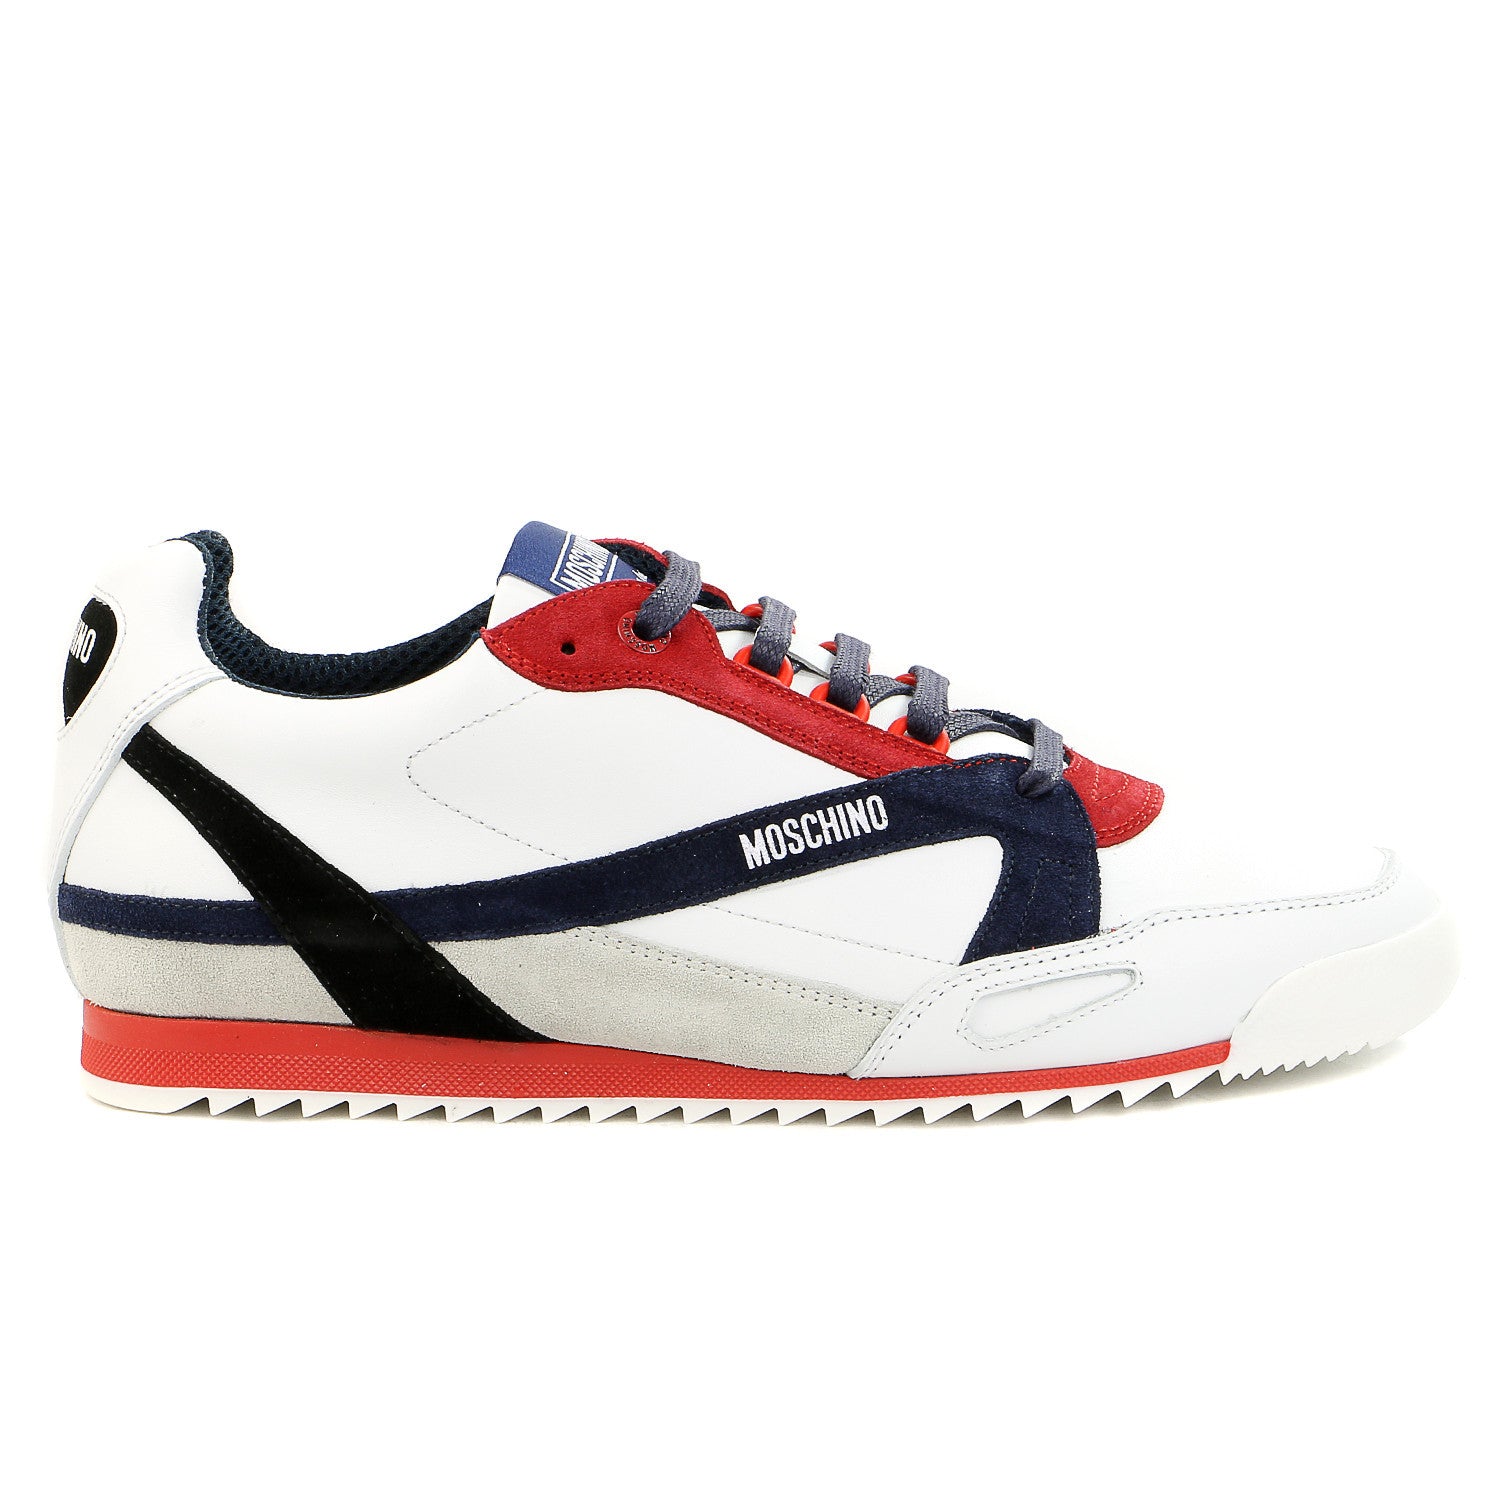 Moschino 56062 Sneaker Shoes - White/Blue/Red - Shoplifestyle